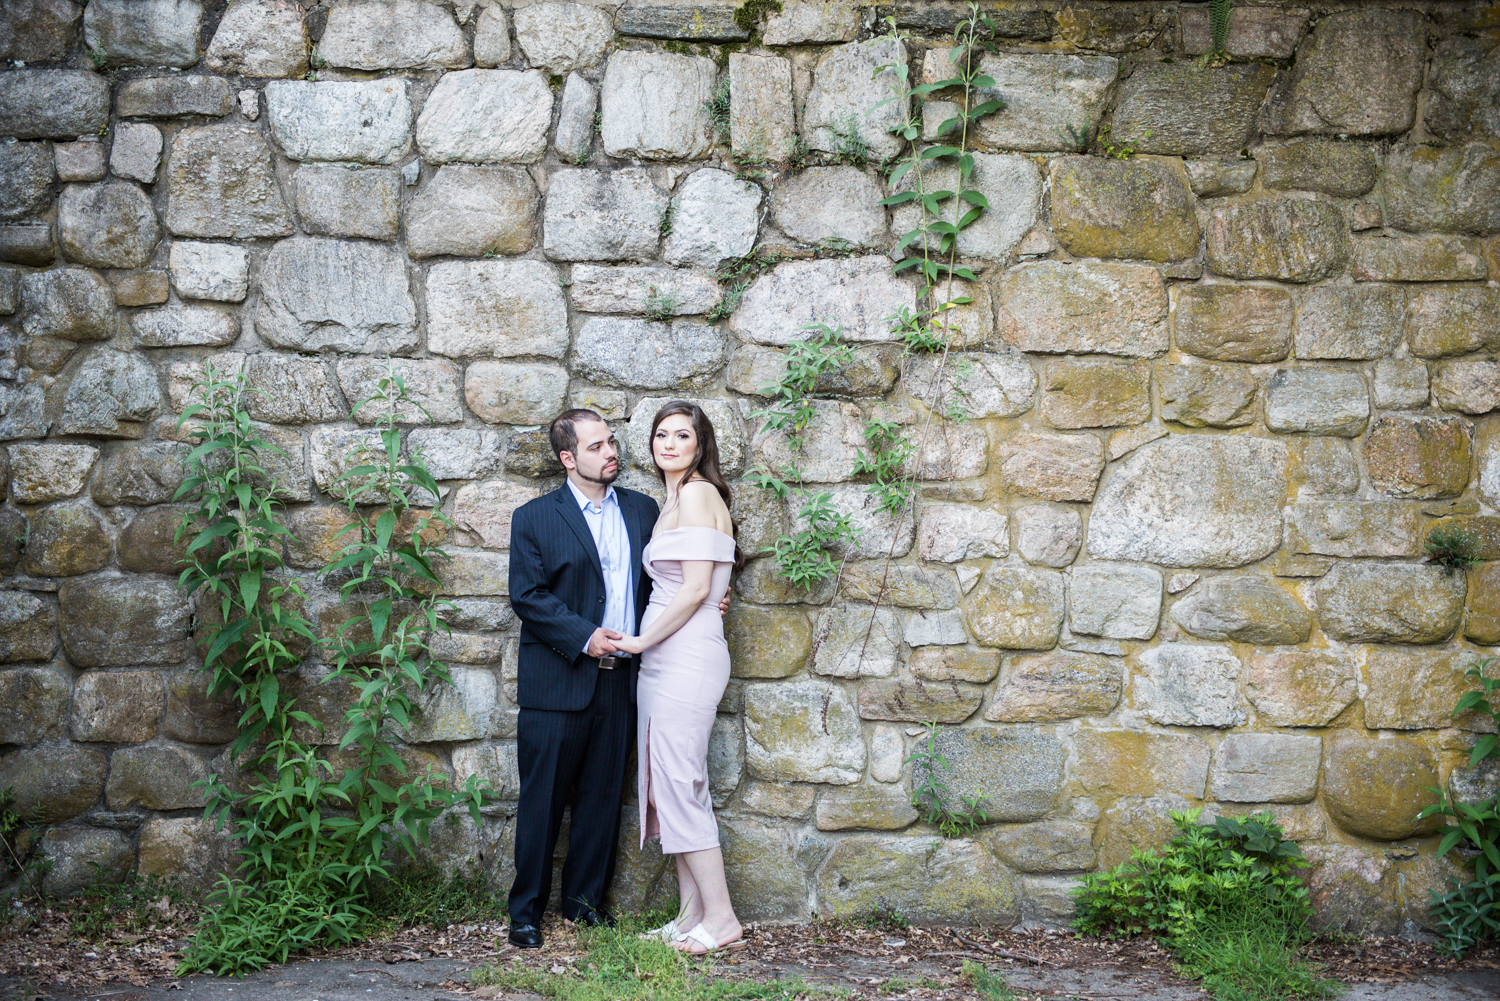 tods-point-park-engagement-session-greenwich-ct-2.jpg